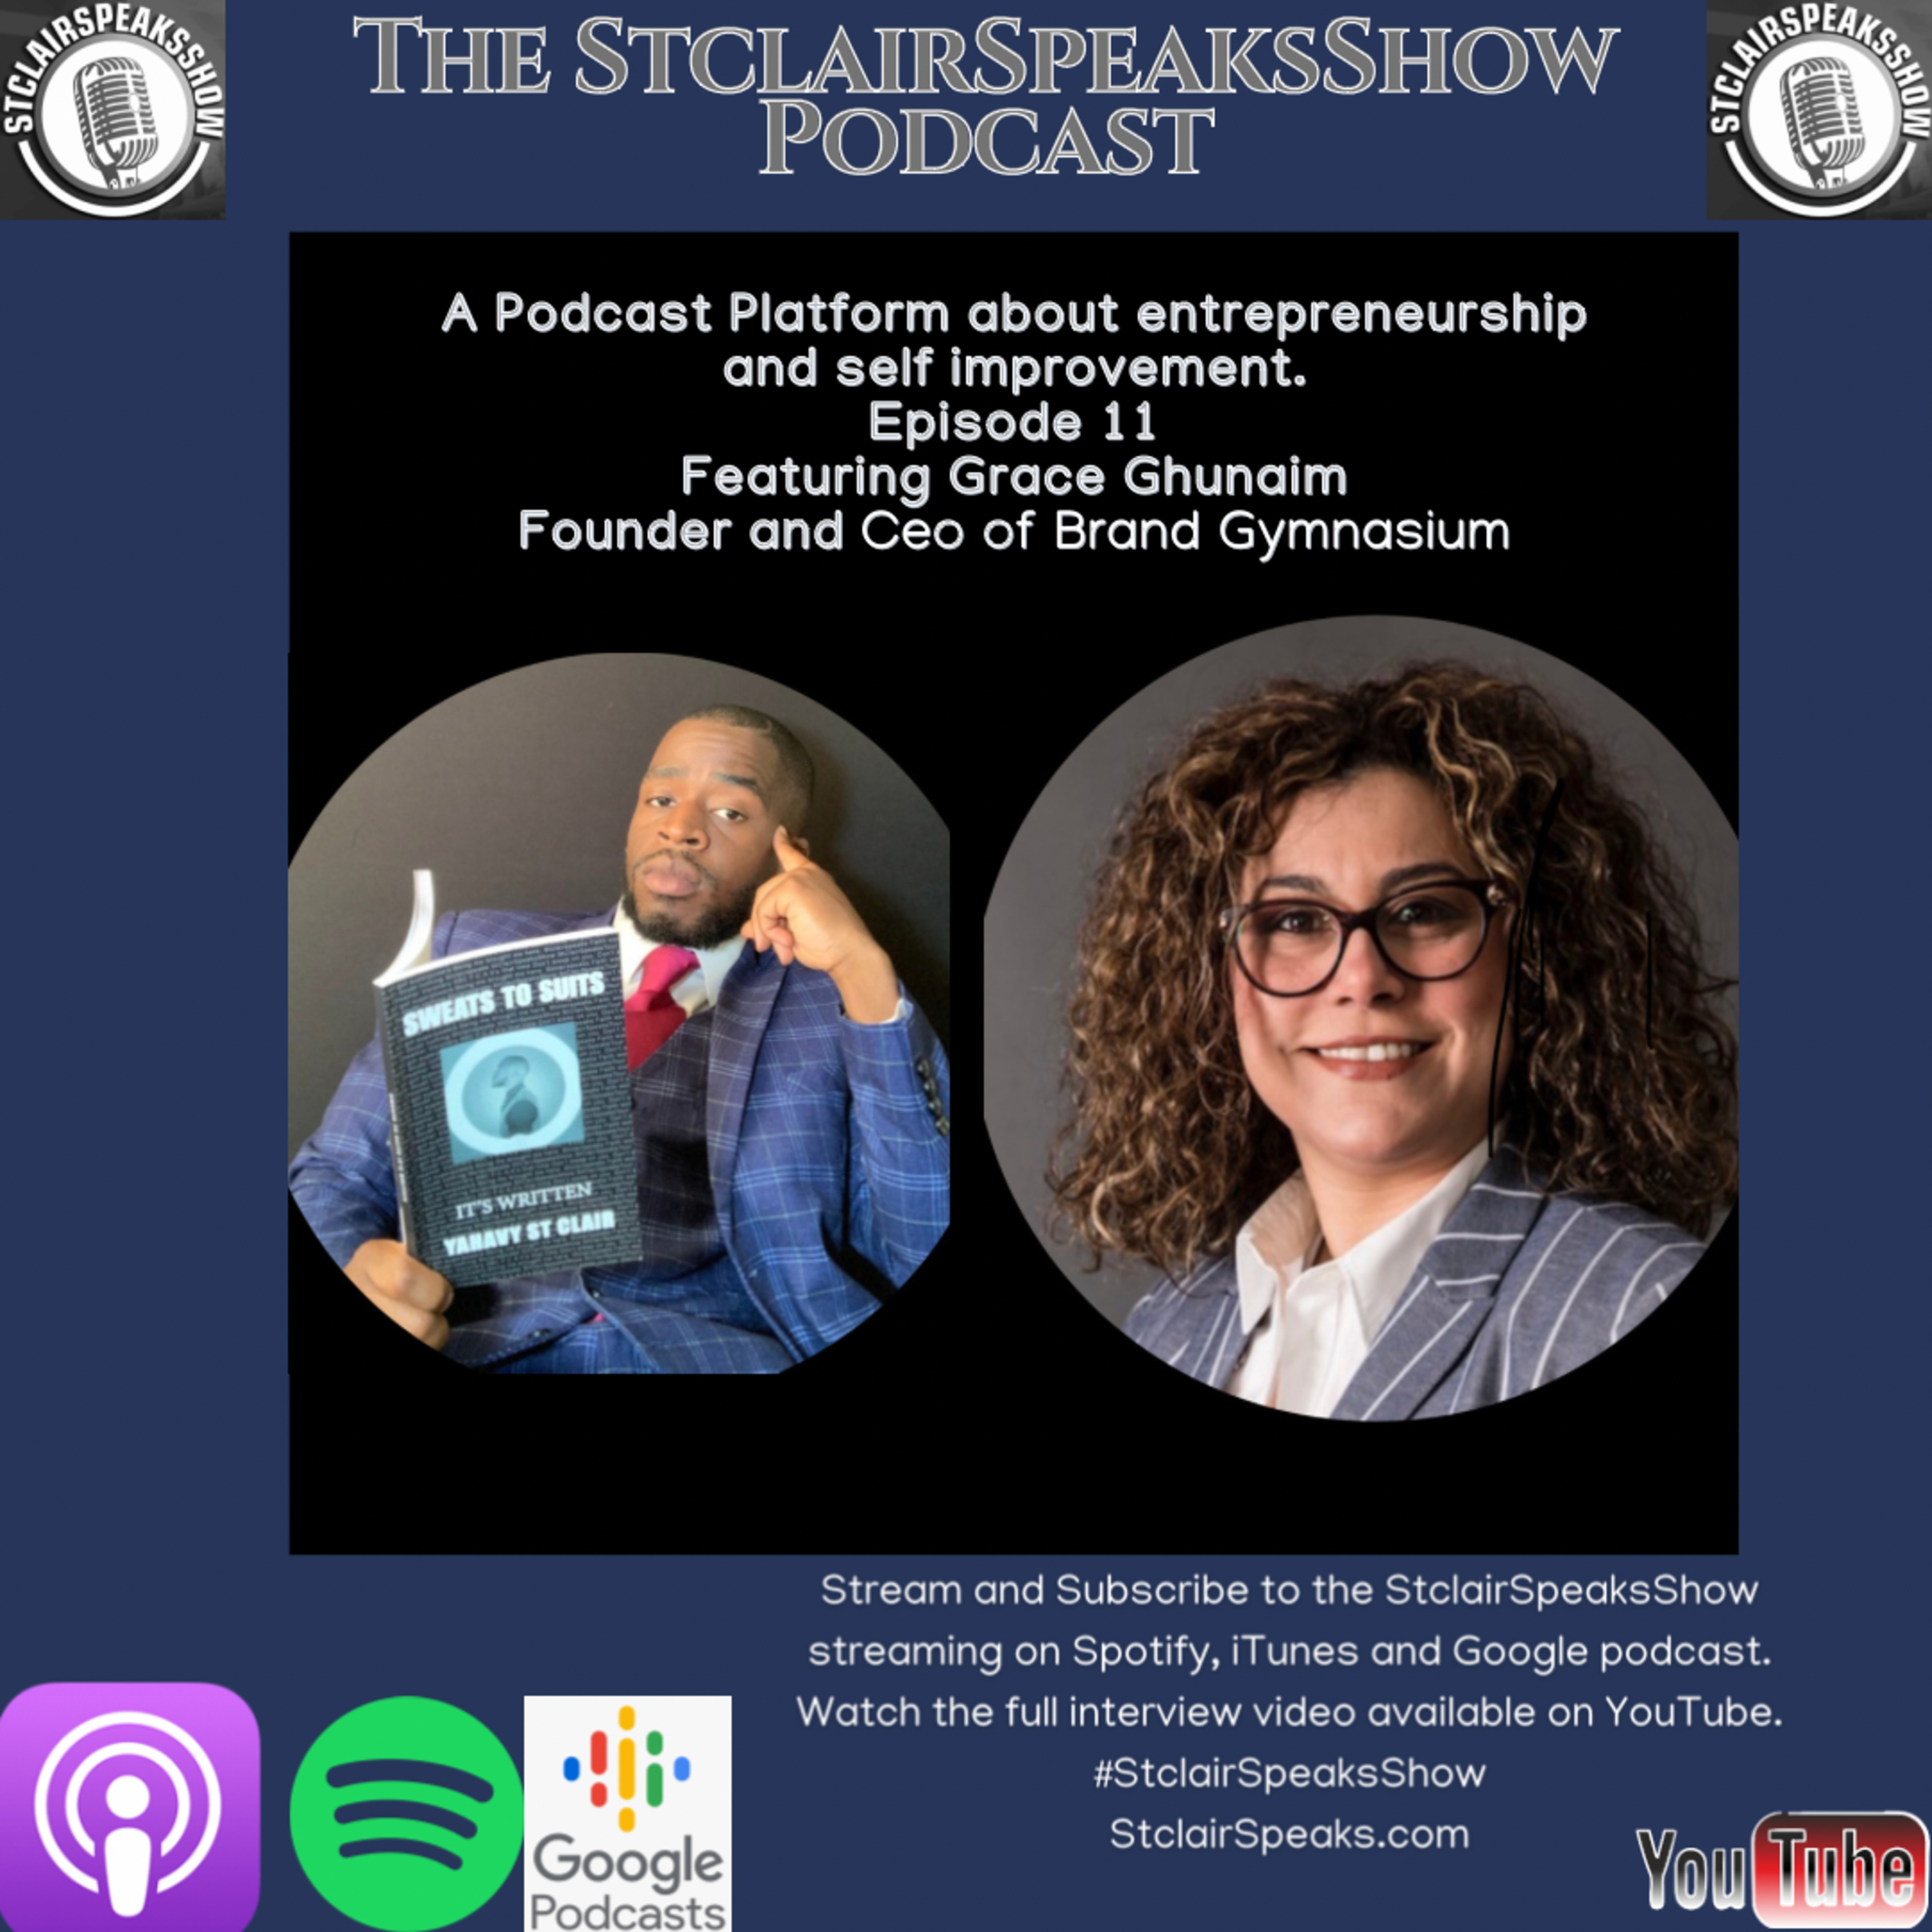 The StclairSpeaksShow Podcast Episode #11 Featuring Grace Ghunaim Founder & Ceo of Brand Gymnasium